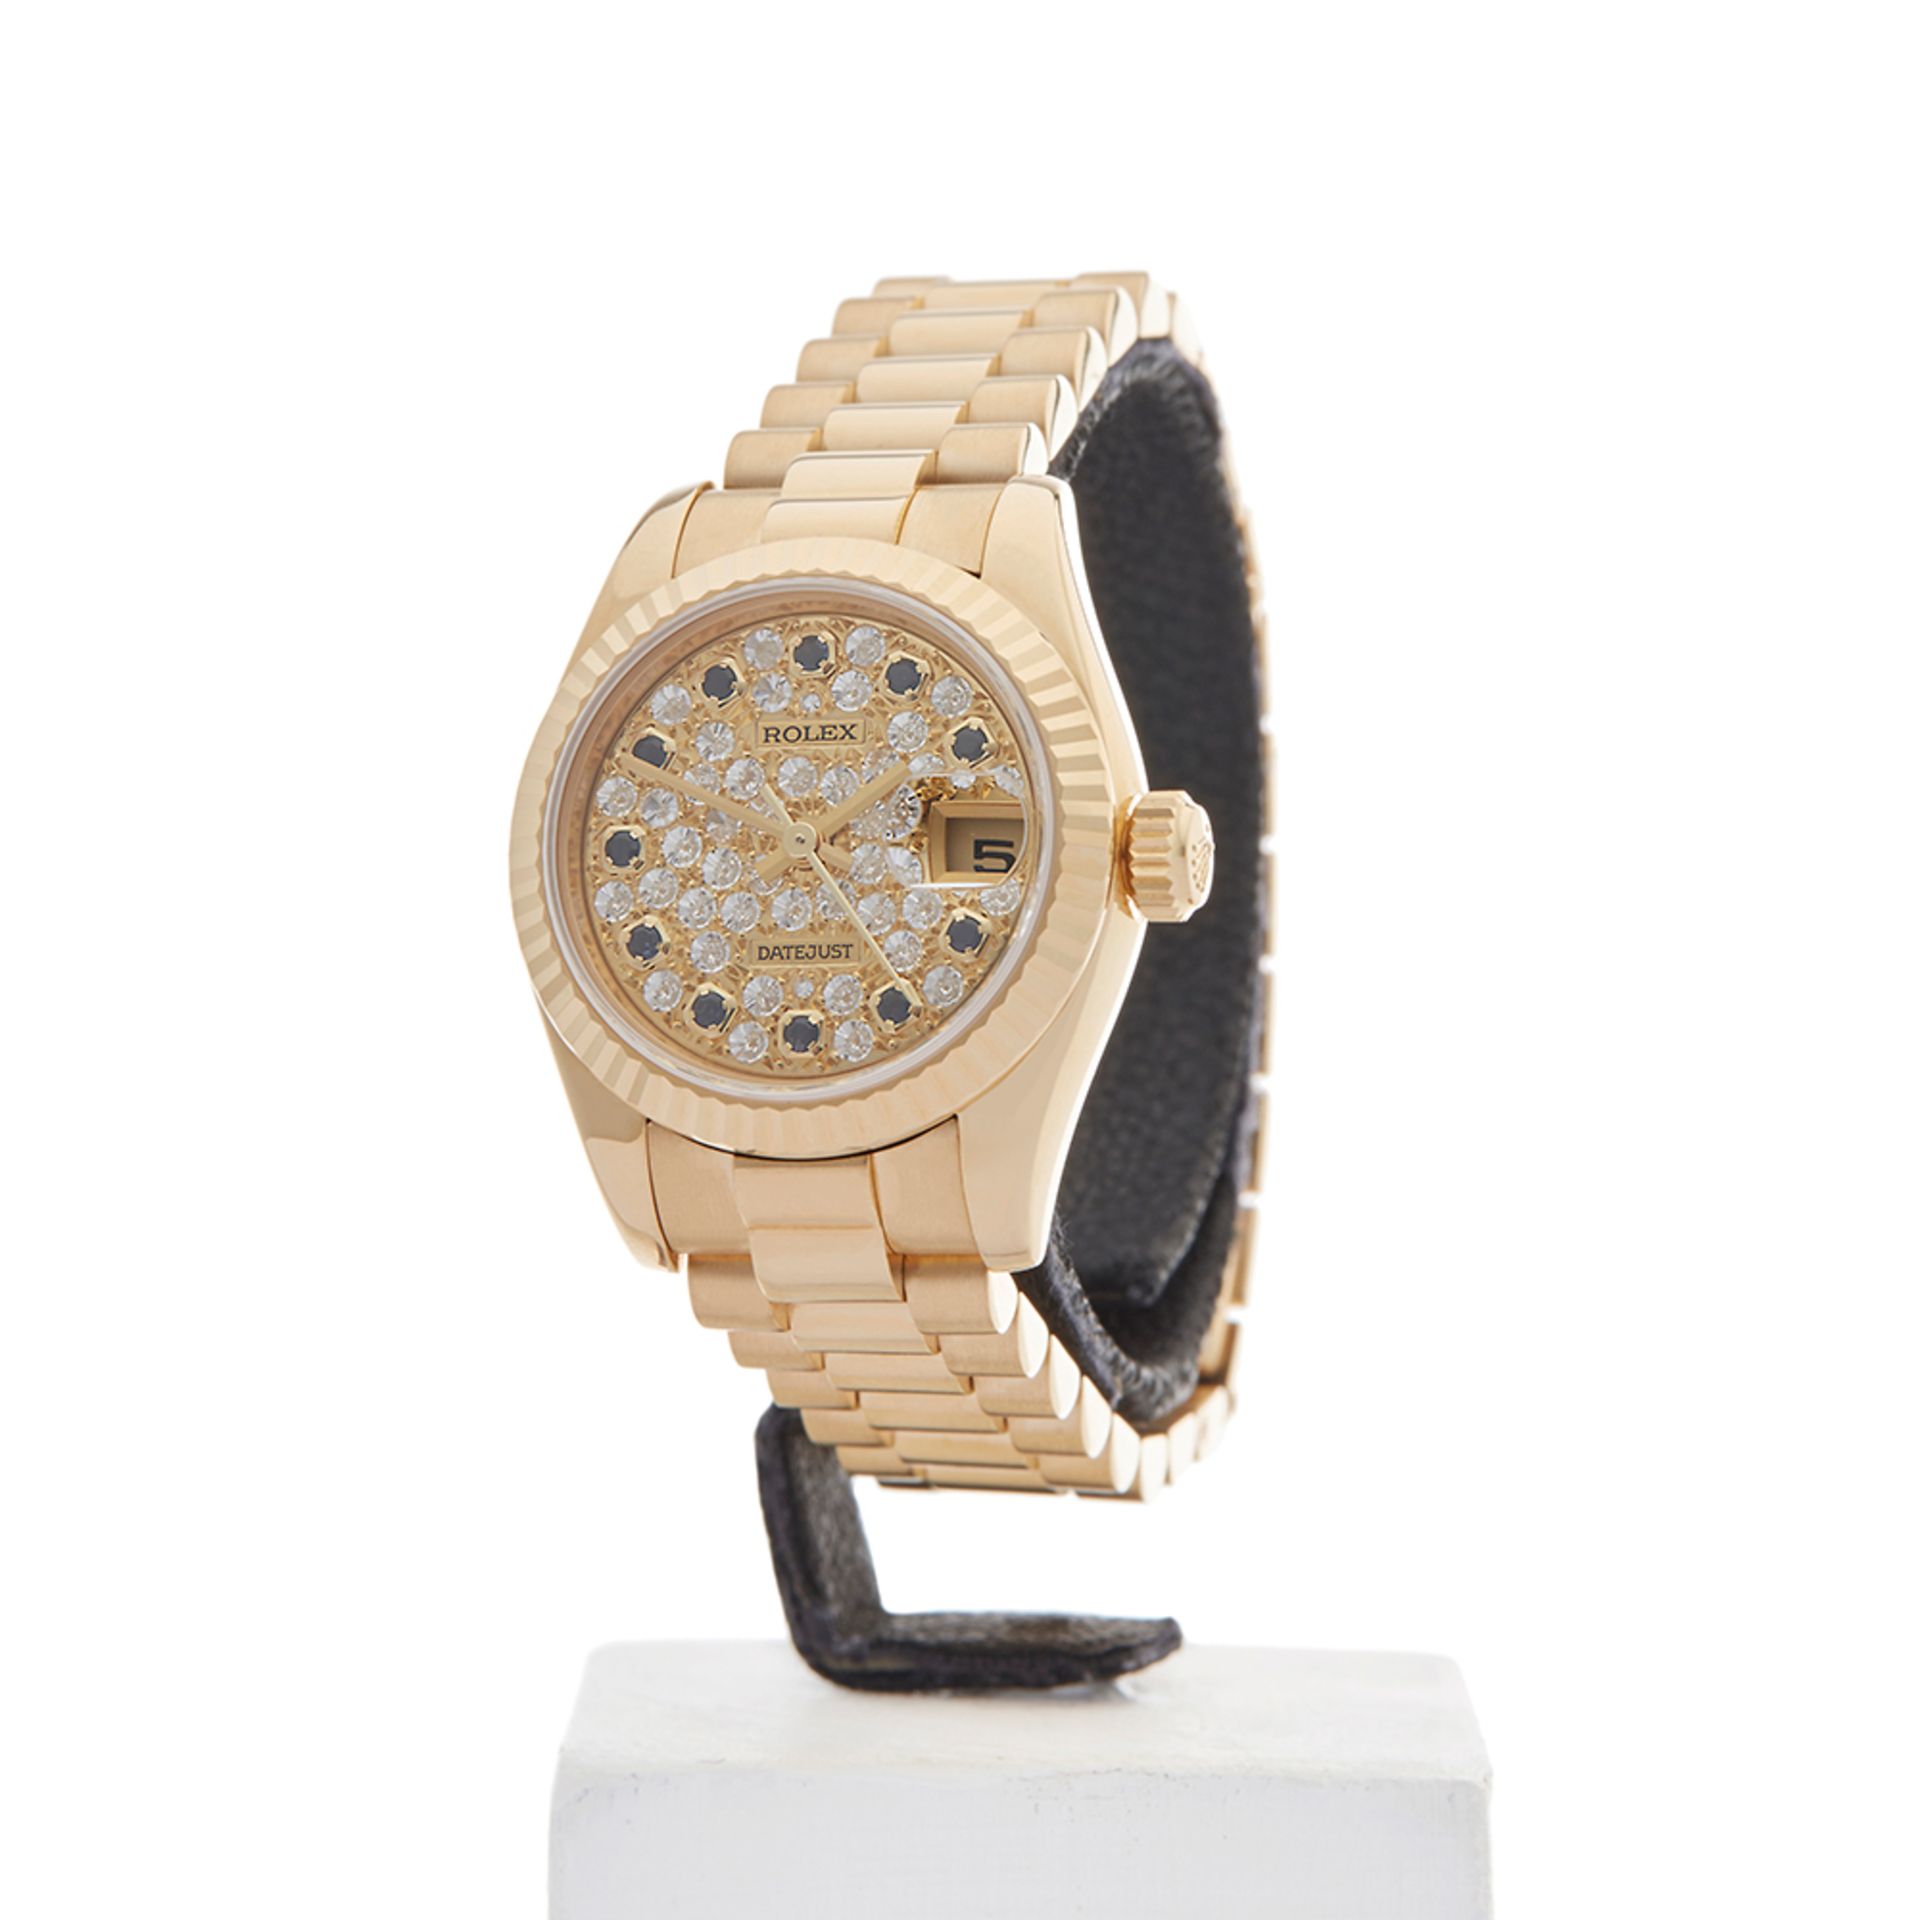 Datejust 26mm 18K Yellow Gold - 179178 - Image 3 of 9